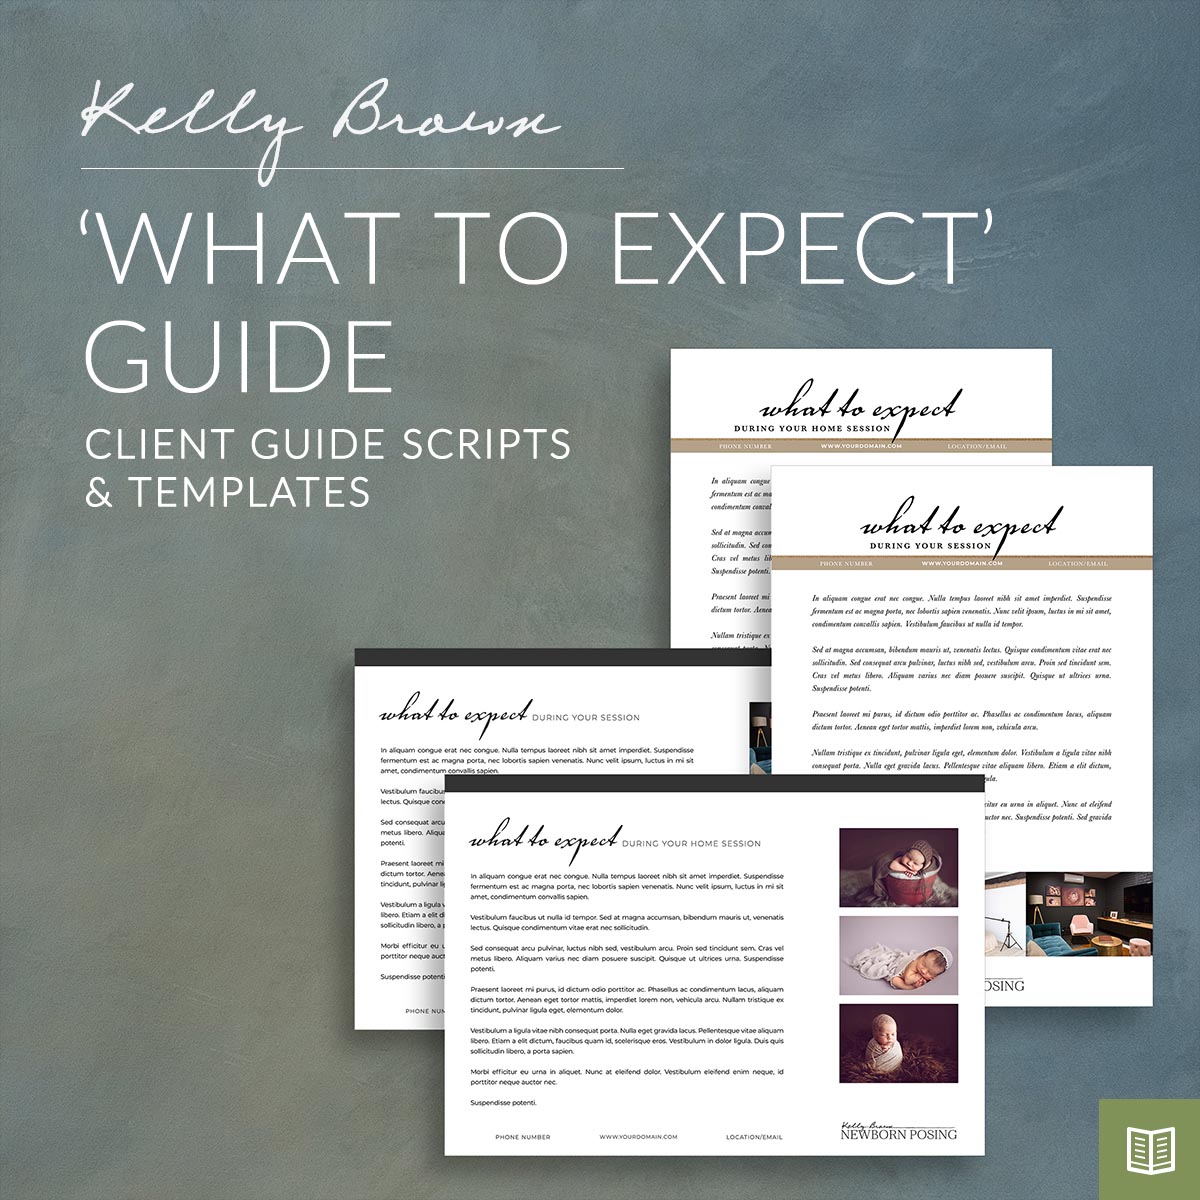 what to expect guide template by kelly brown 